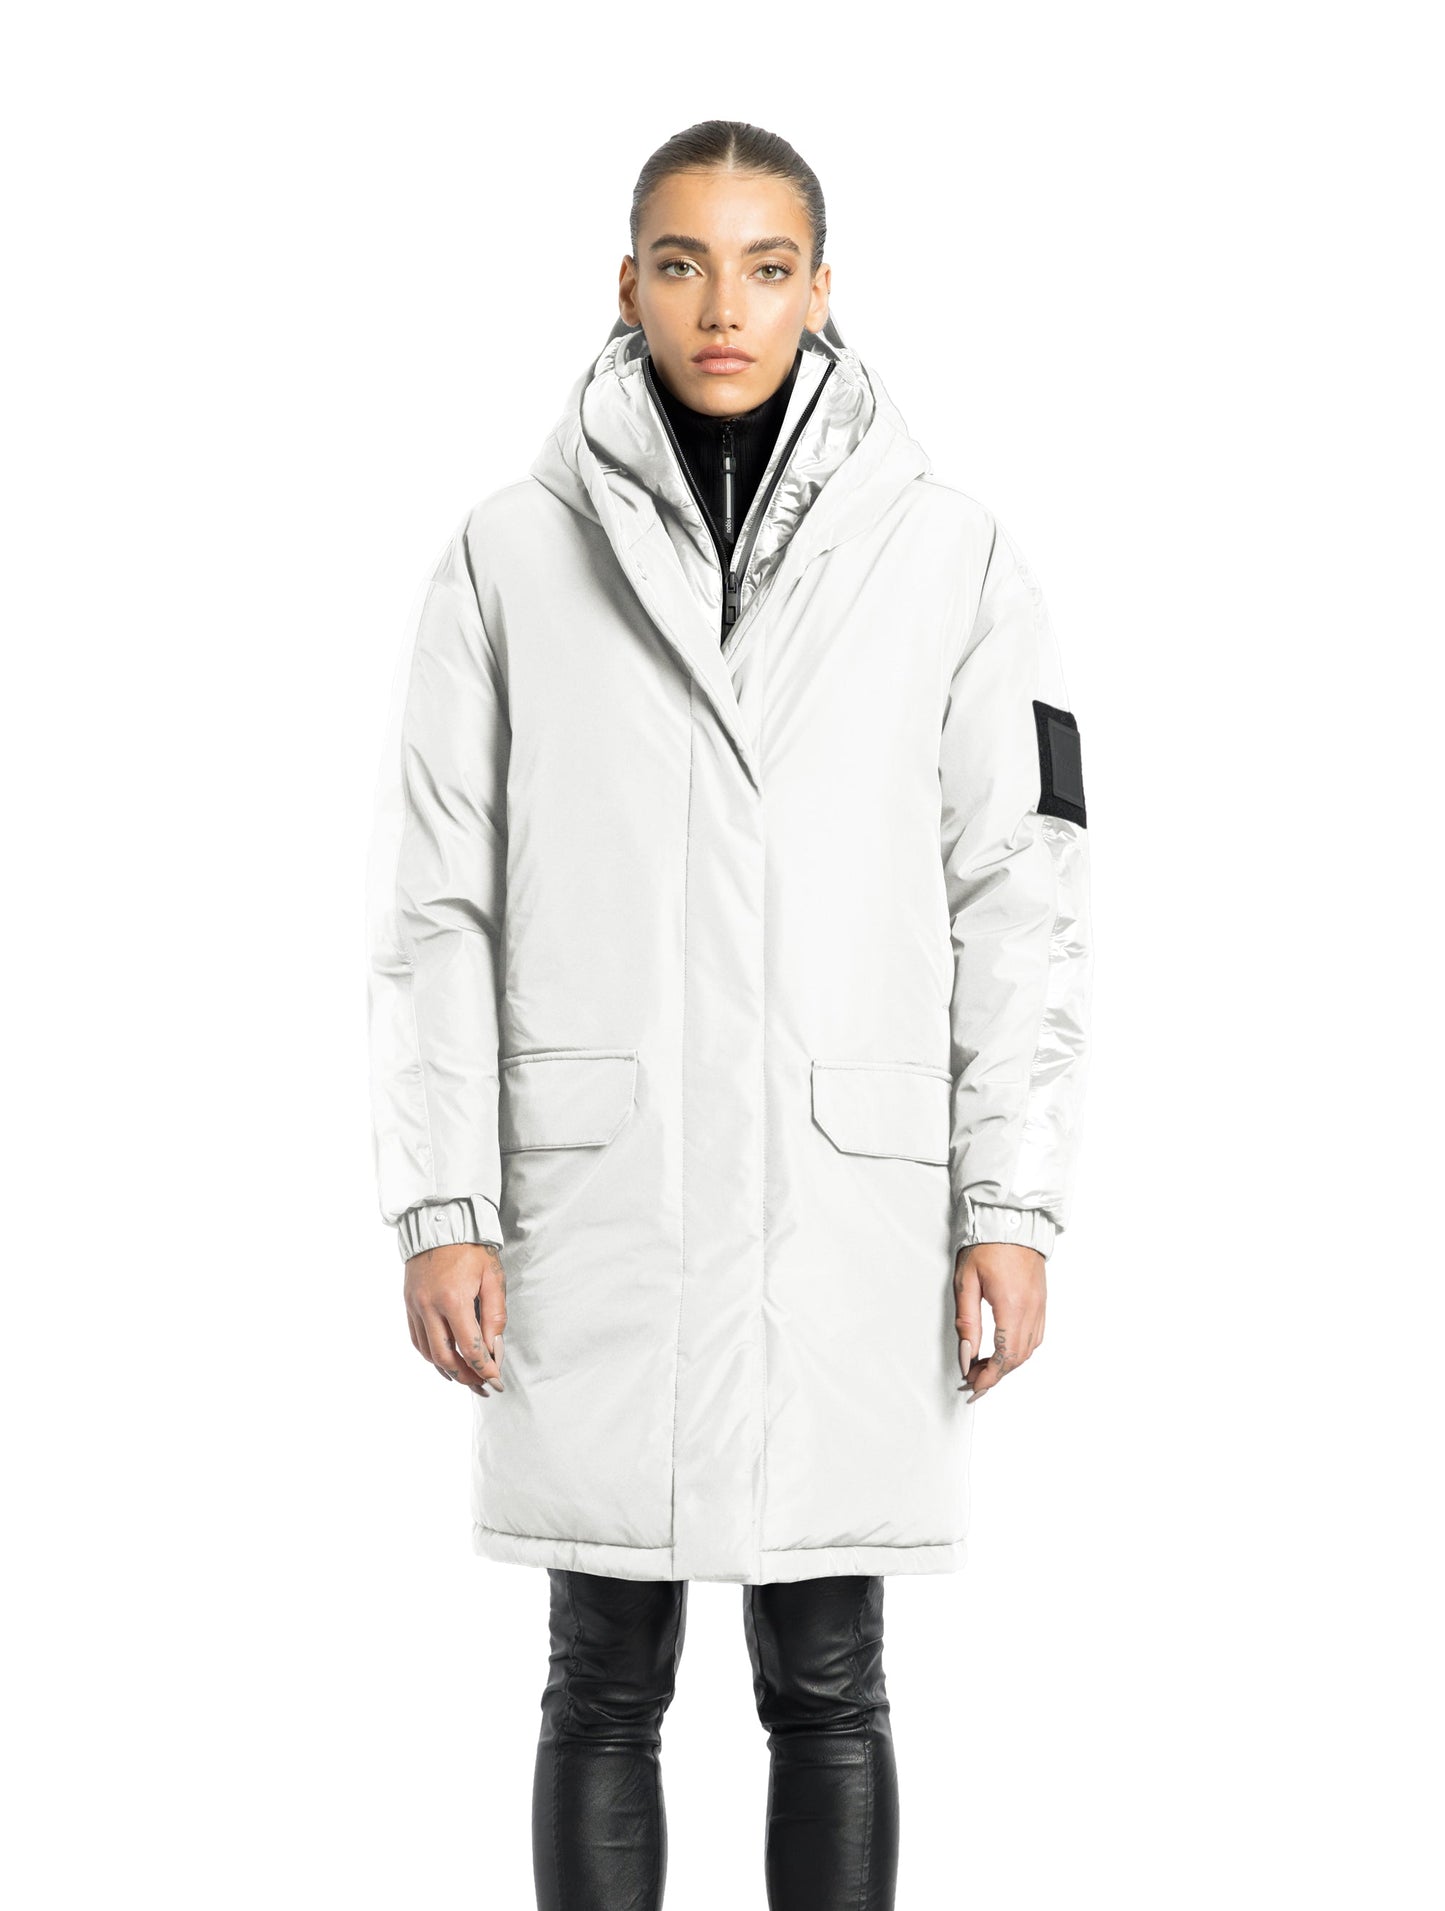 Slyn Women's Performance Parka in thigh length, premium 3-ply micro denier and cire technical nylon taffeta fabrication, Premium Canadian origin White Duck Down insulation, non-removable down-filled hood, inner hooded gilet, two-way centre-front zipper with magnetic closure wind flap, fleece-lined pockets at chest and waist, pit zipper vents, in Chalk